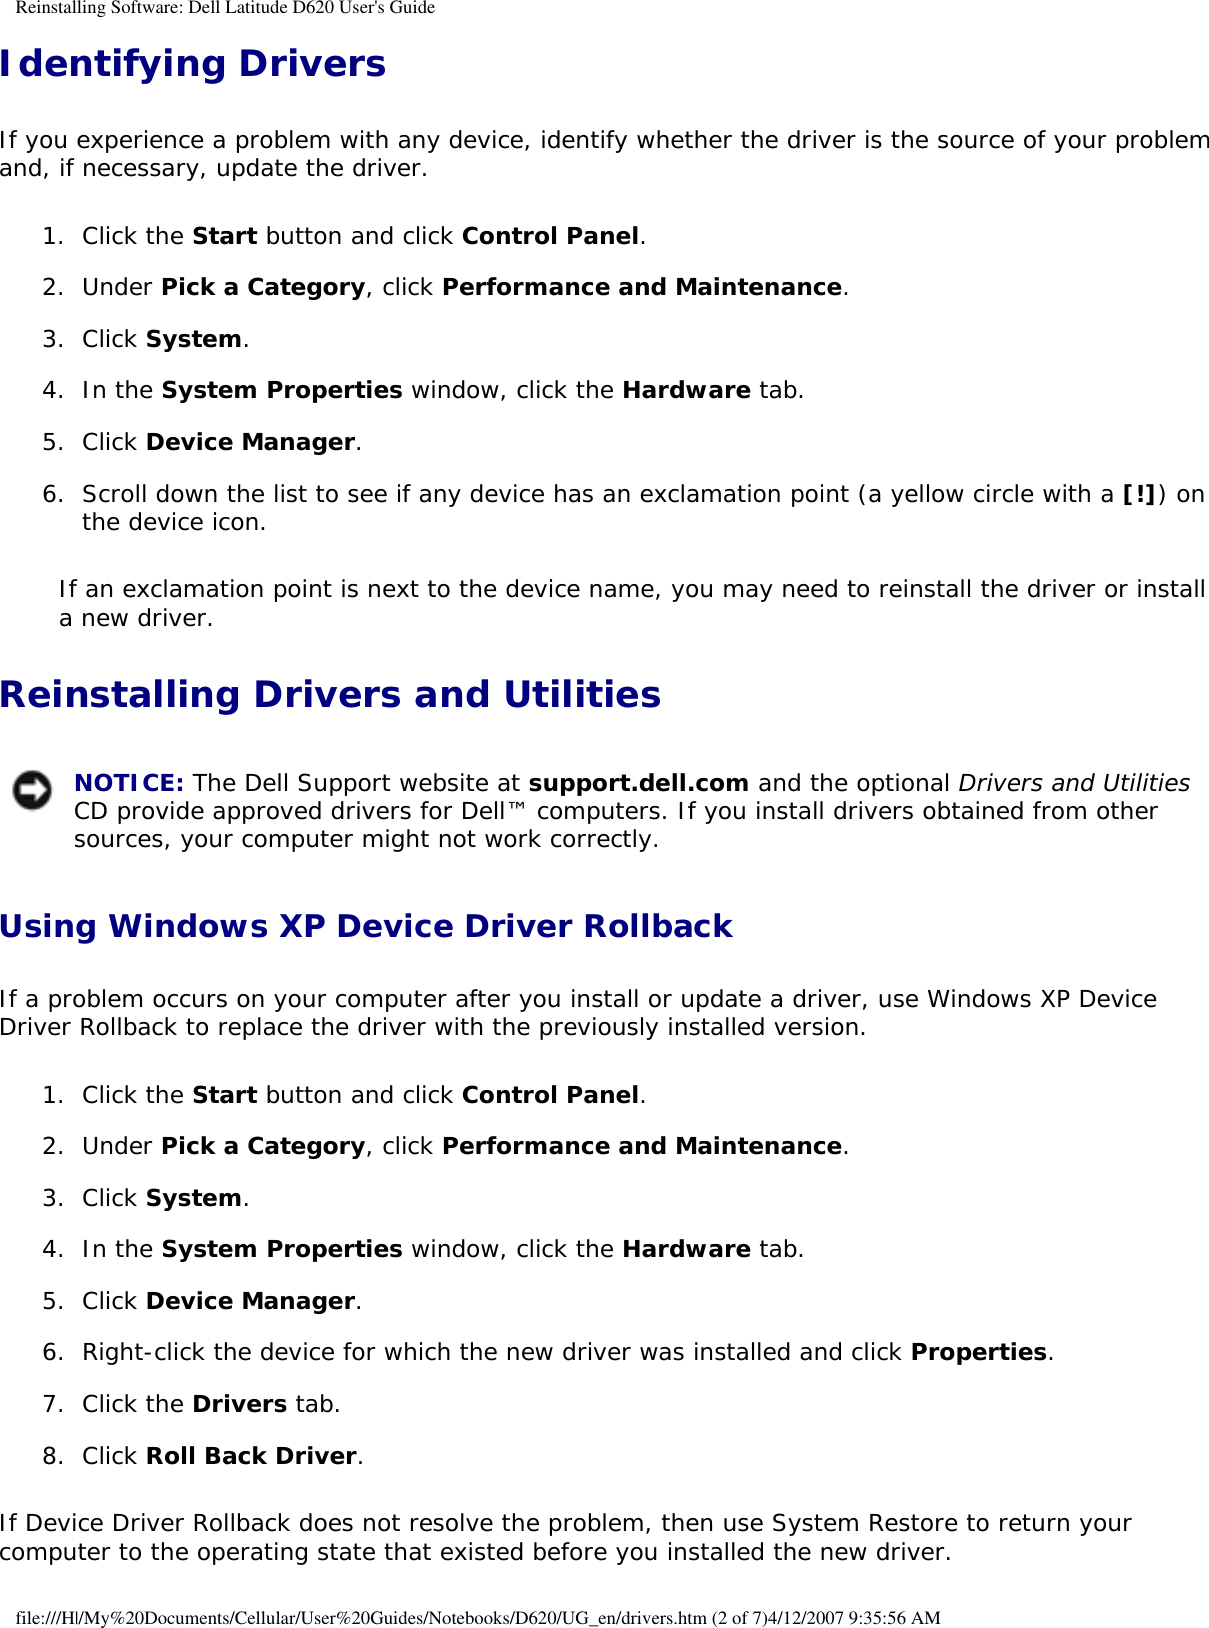 Reinstalling Software: Dell Latitude D620 User&apos;s GuideIdentifying DriversIf you experience a problem with any device, identify whether the driver is the source of your problem and, if necessary, update the driver.1.  Click the Start button and click Control Panel.   2.  Under Pick a Category, click Performance and Maintenance.   3.  Click System.   4.  In the System Properties window, click the Hardware tab.   5.  Click Device Manager.   6.  Scroll down the list to see if any device has an exclamation point (a yellow circle with a [!]) on the device icon.   If an exclamation point is next to the device name, you may need to reinstall the driver or install a new driver.Reinstalling Drivers and Utilities NOTICE: The Dell Support website at support.dell.com and the optional Drivers and Utilities CD provide approved drivers for Dell™ computers. If you install drivers obtained from other sources, your computer might not work correctly.Using Windows XP Device Driver Rollback If a problem occurs on your computer after you install or update a driver, use Windows XP Device Driver Rollback to replace the driver with the previously installed version.1.  Click the Start button and click Control Panel.   2.  Under Pick a Category, click Performance and Maintenance.   3.  Click System.   4.  In the System Properties window, click the Hardware tab.   5.  Click Device Manager.   6.  Right-click the device for which the new driver was installed and click Properties.   7.  Click the Drivers tab.   8.  Click Roll Back Driver.   If Device Driver Rollback does not resolve the problem, then use System Restore to return your computer to the operating state that existed before you installed the new driver.file:///H|/My%20Documents/Cellular/User%20Guides/Notebooks/D620/UG_en/drivers.htm (2 of 7)4/12/2007 9:35:56 AM